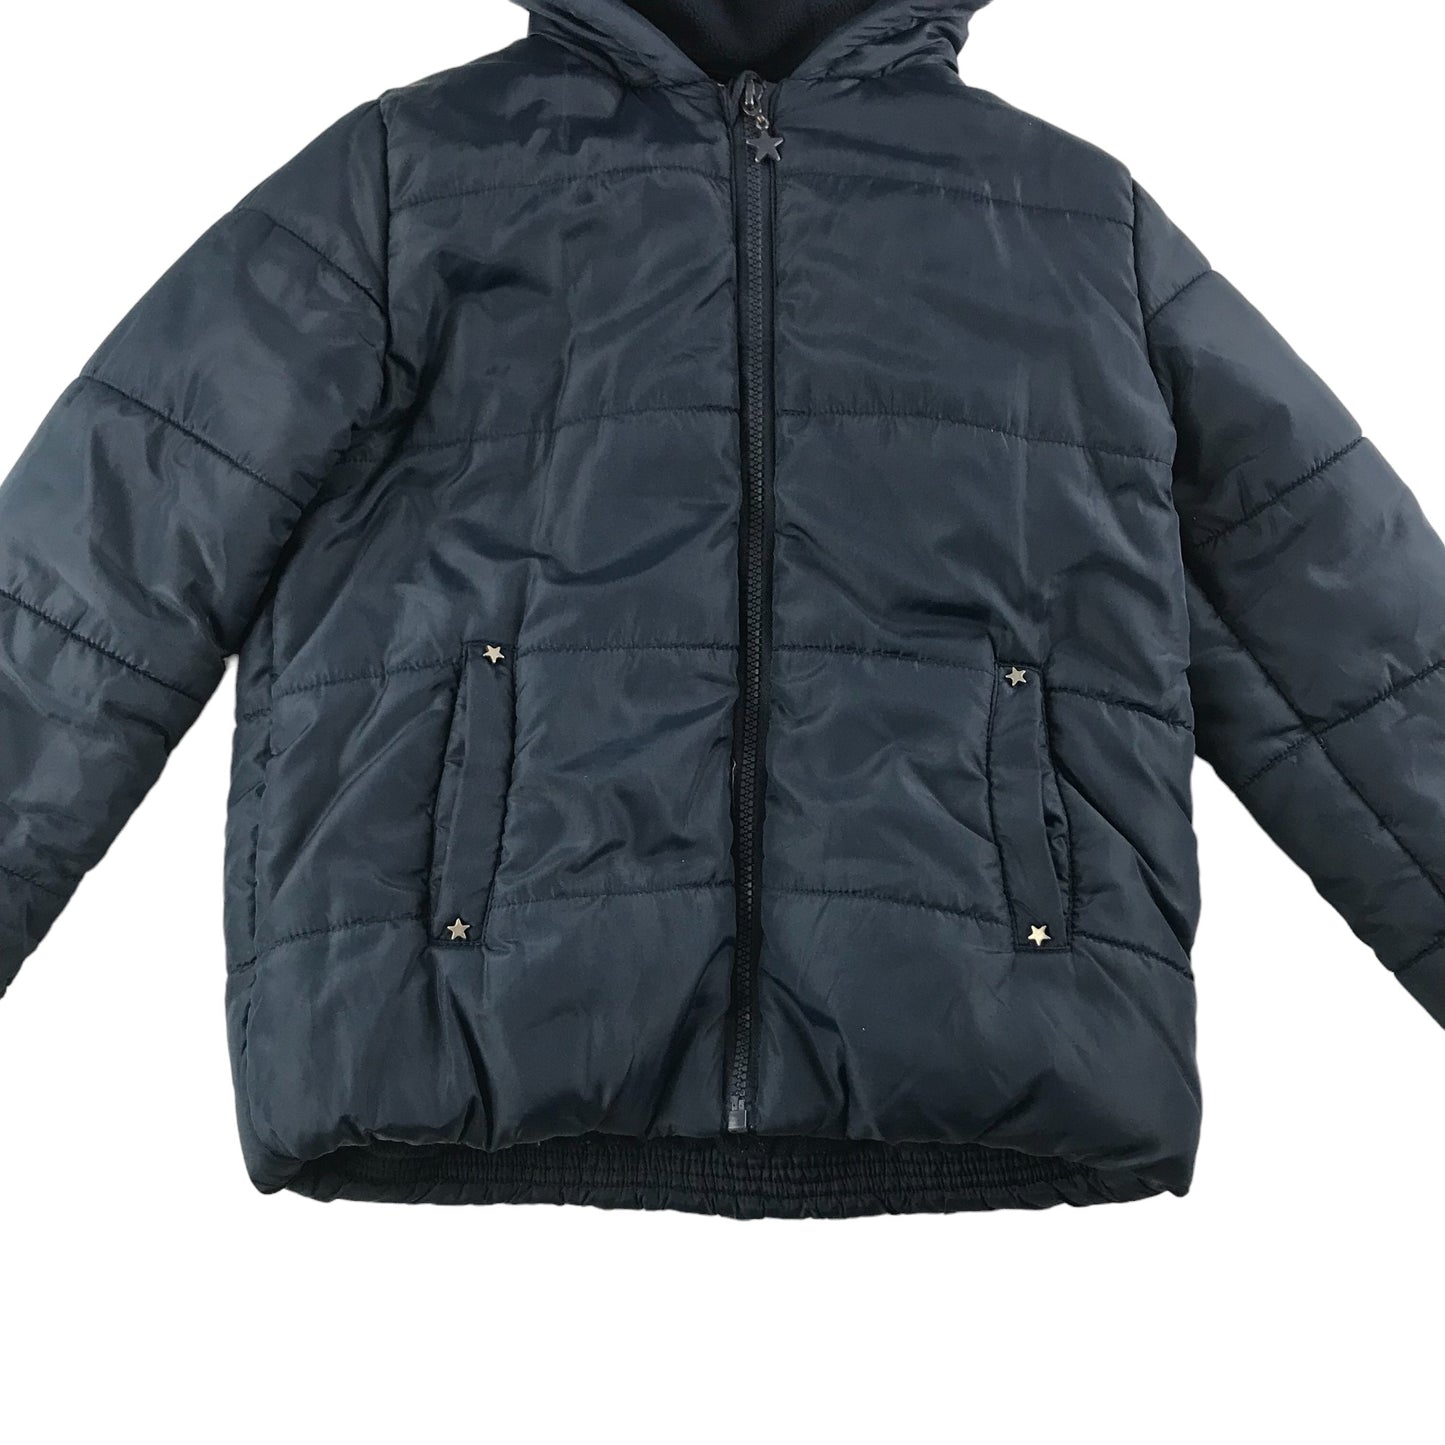 River Island Jacket Age 8 Navy Blue Puffer with Hood